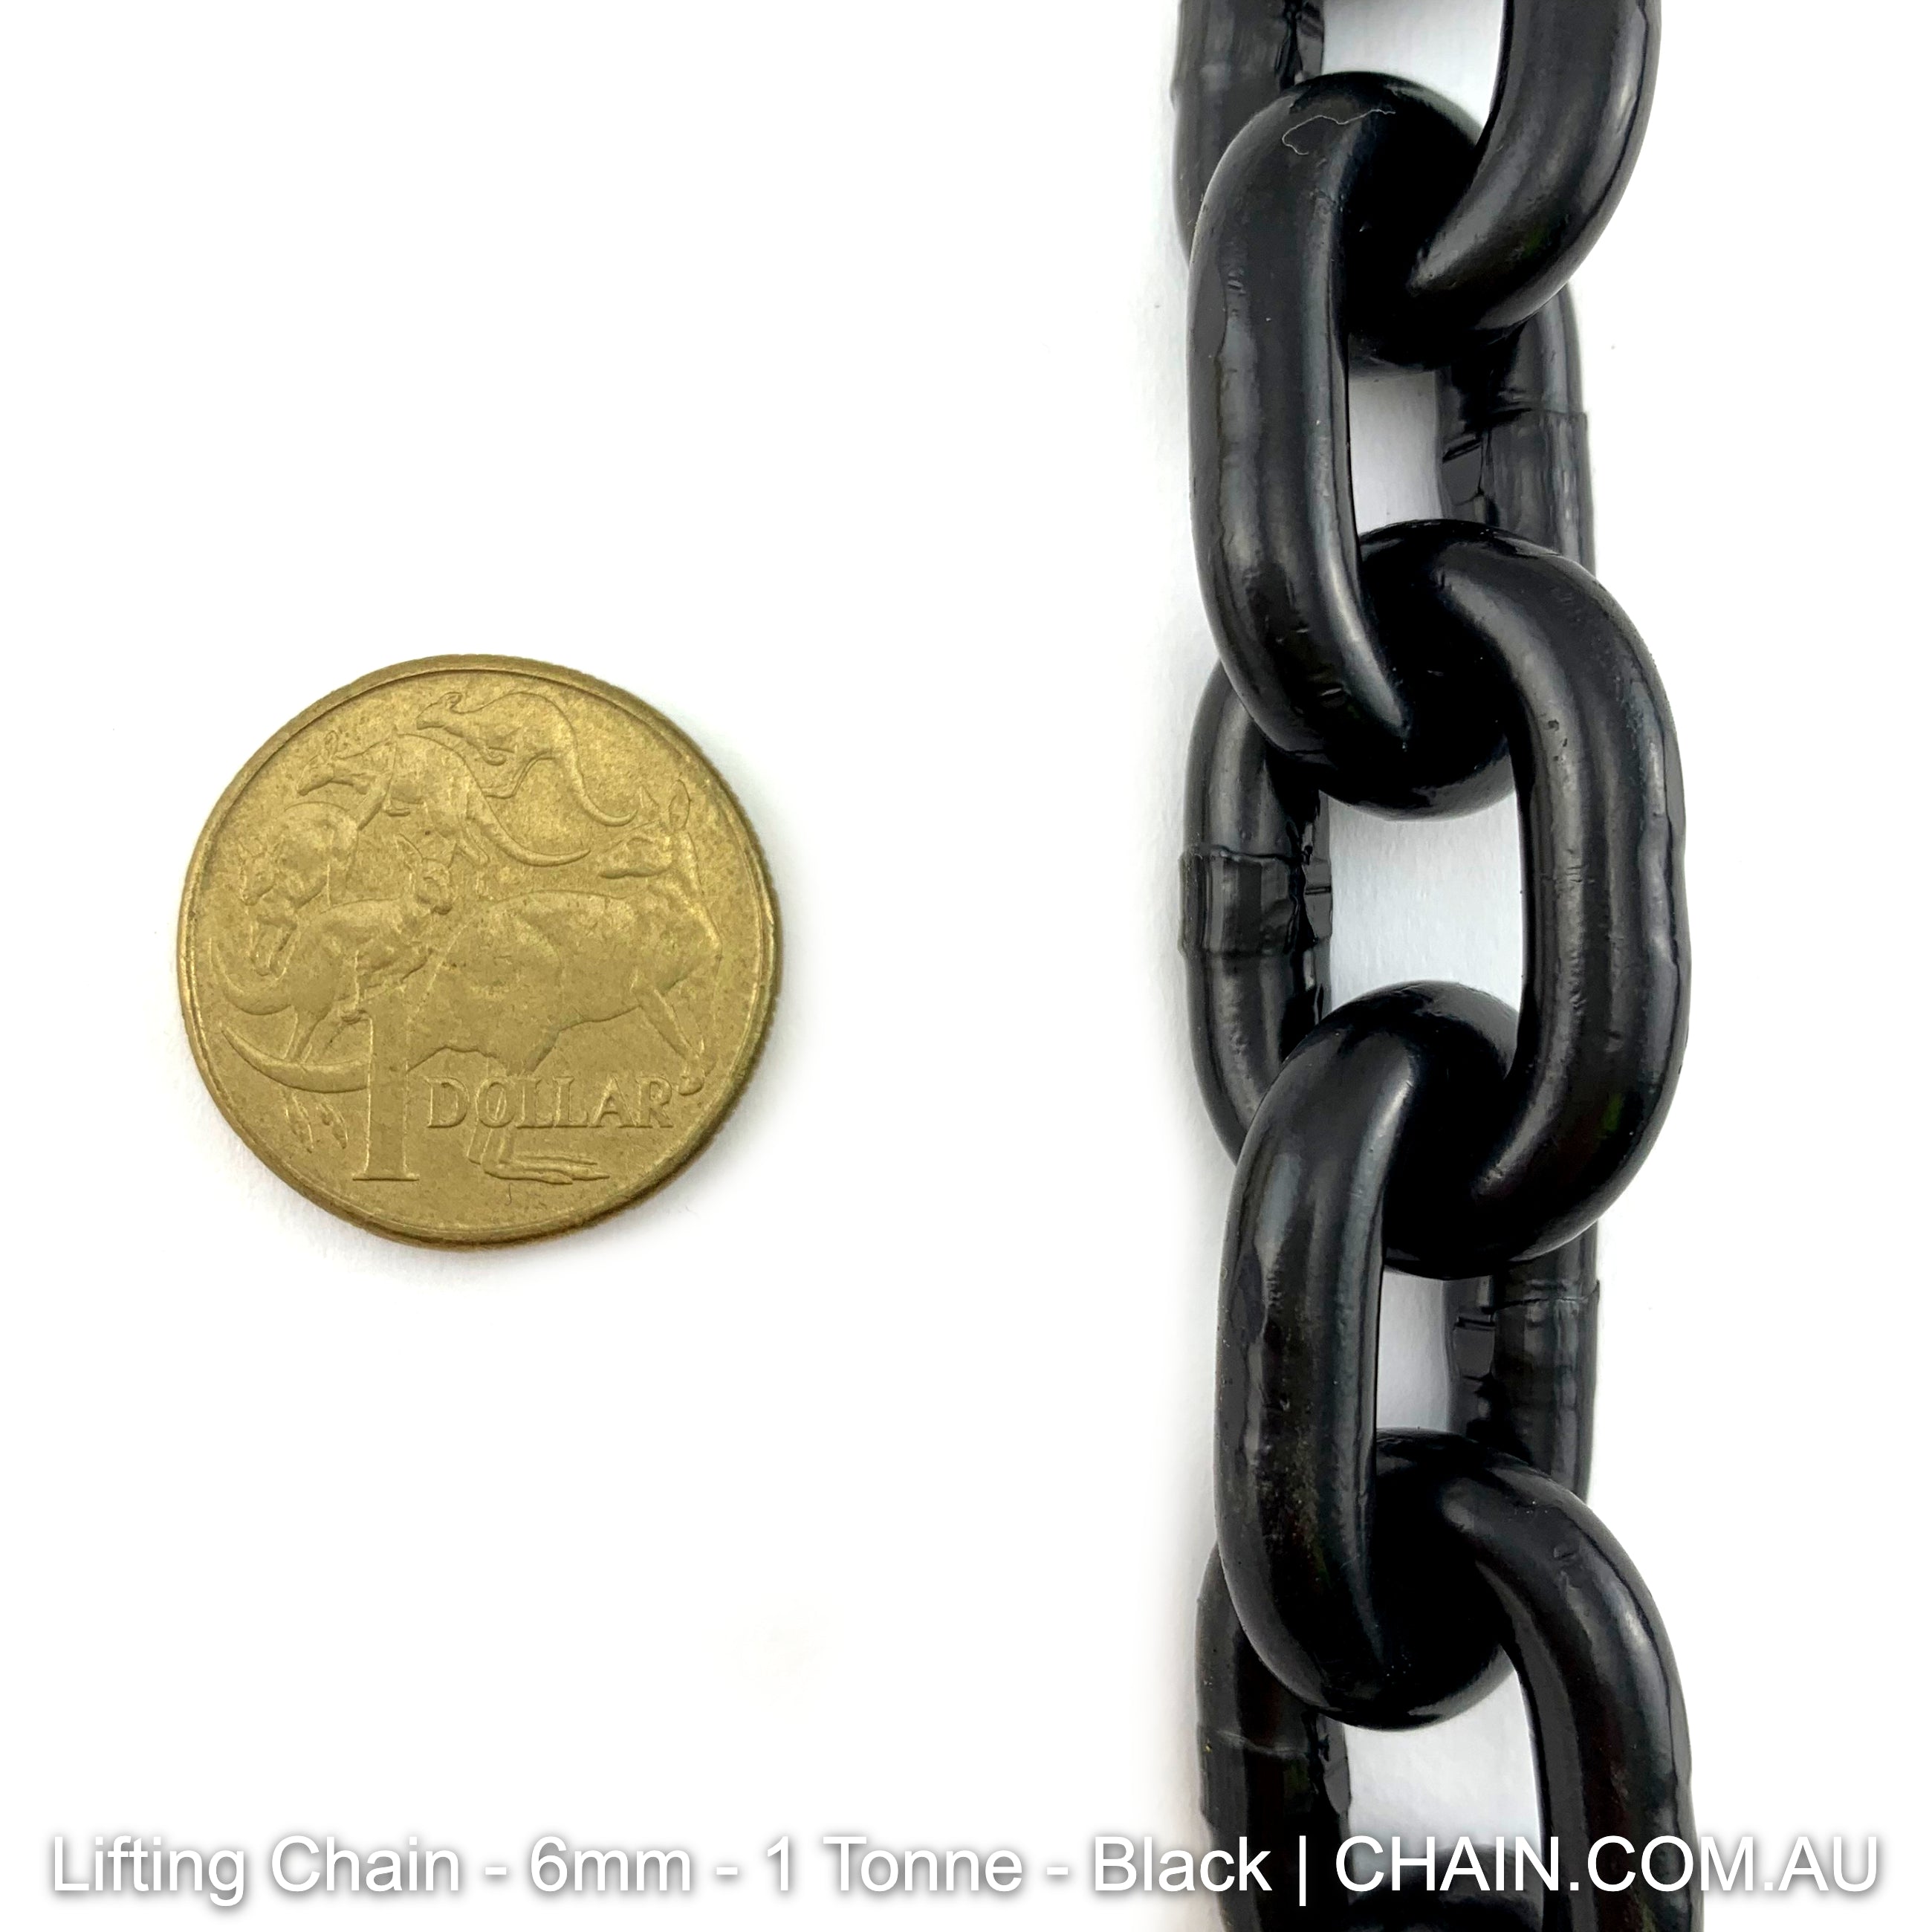 Lifting Chain - Black Steel - size: 6mm - Tested & Rated to 1 tonne. Shop chain online at chain.com.au. Australia wide shipping.